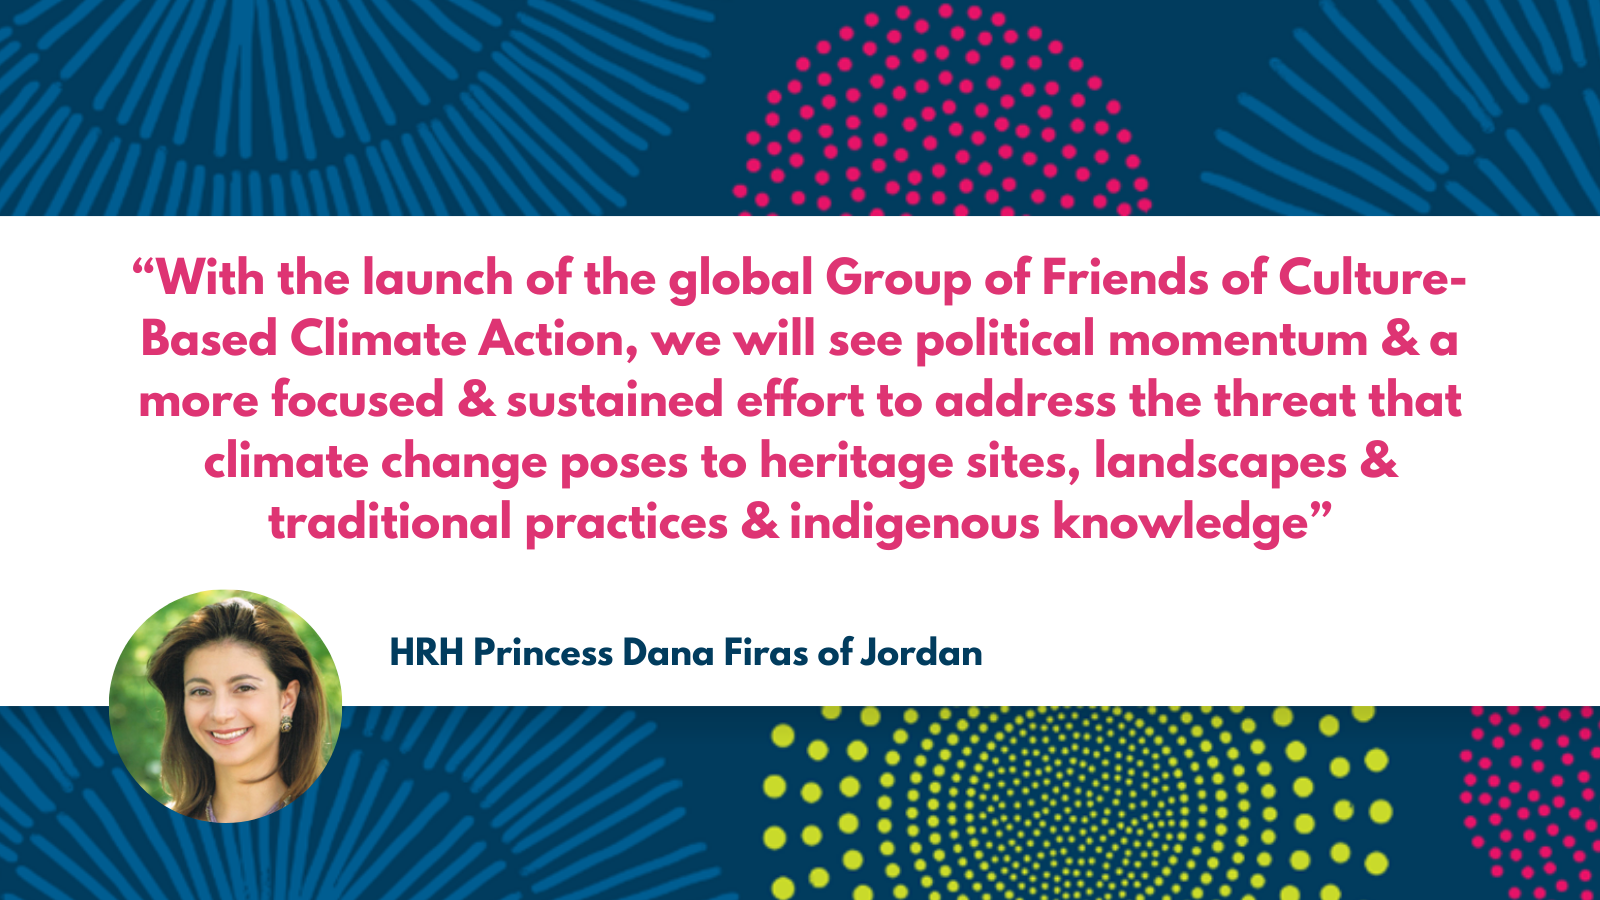 A quote with a photograph of Princess Dana Firas. “With the launch of the global Group of Friends of Culture-Based Climate Action, we will see political momentum and a more focused and sustained effort to address the threat that climate change poses to heritage sites, landscapes and traditional practices and indigenous knowledge.” HRH Princess Dana Firas of Jordan.